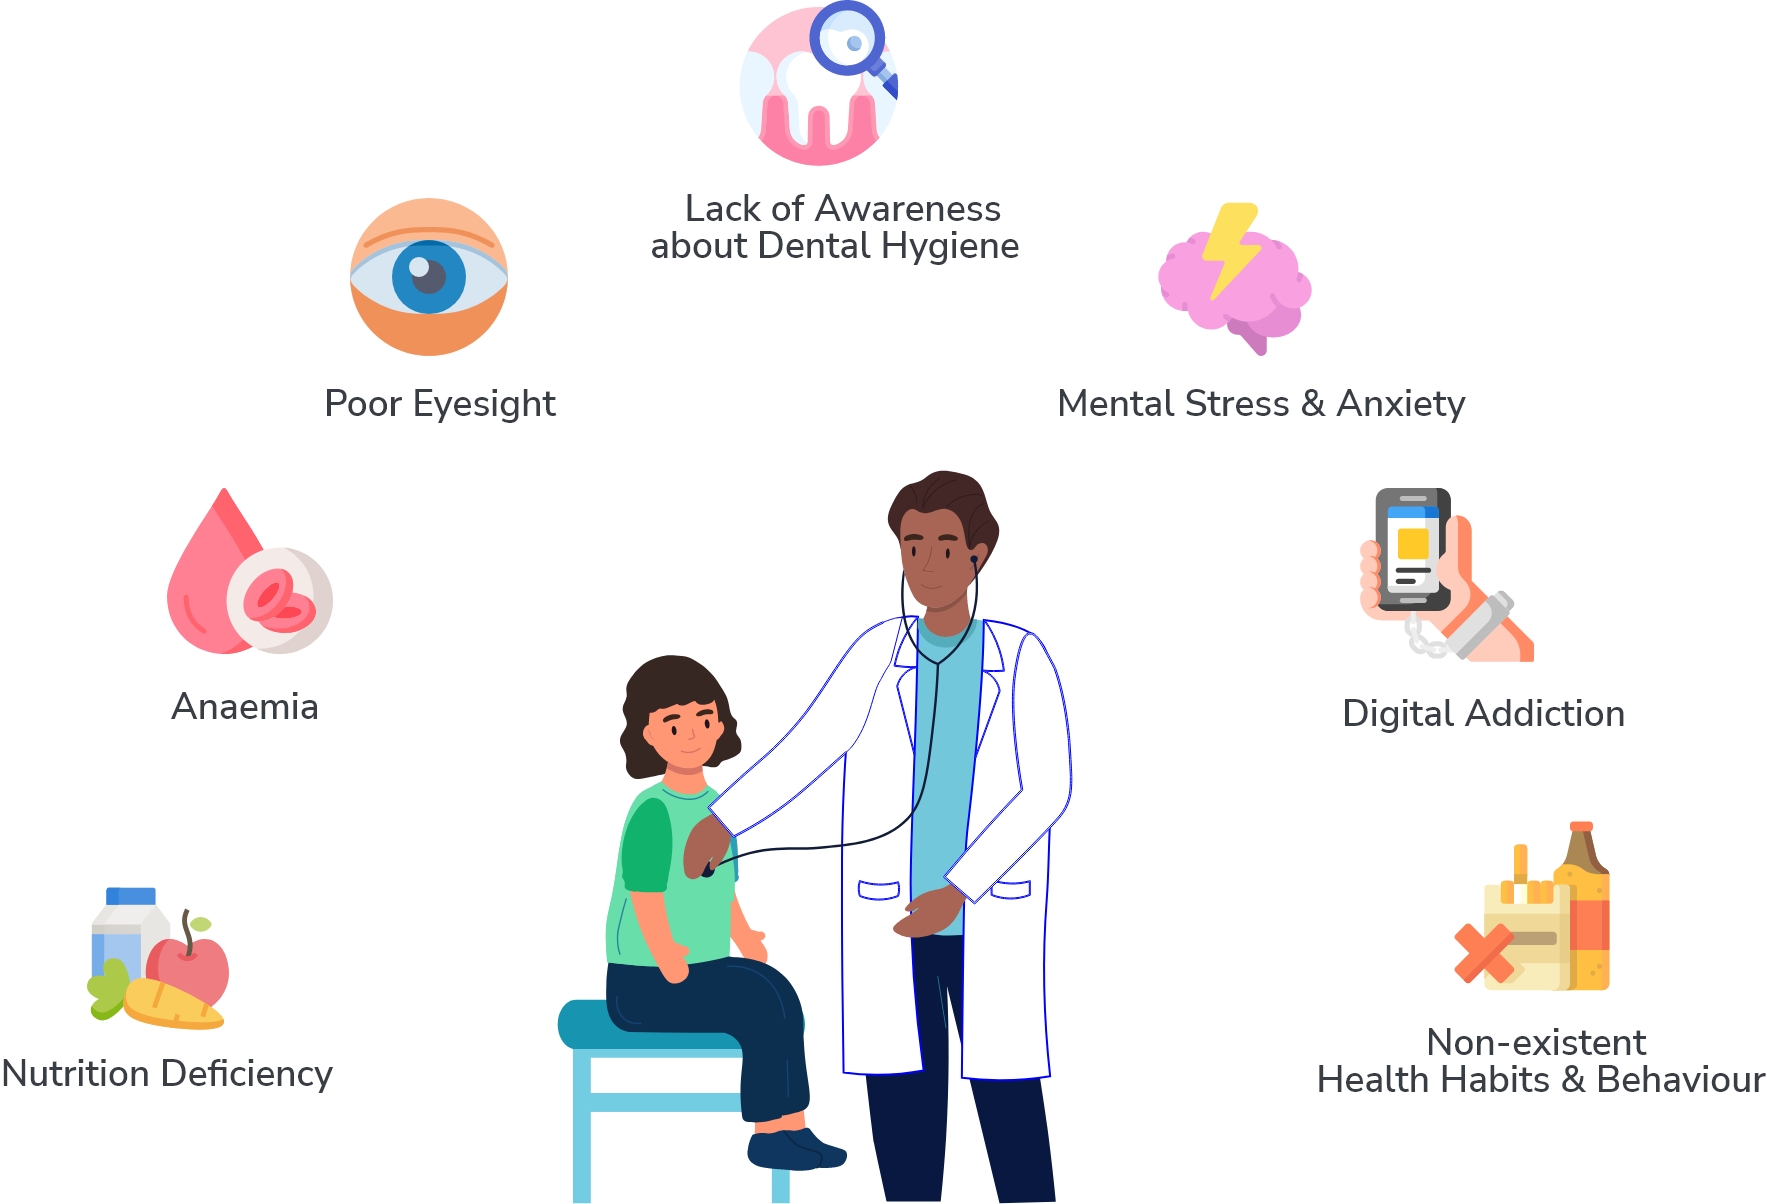 This illustration depicts a doctor examining a young girl in 3d vector form. The small icons of an eye, a tooth, a mobile phone, a fruit, a vegetable, and an alcohol bottle are placed around them